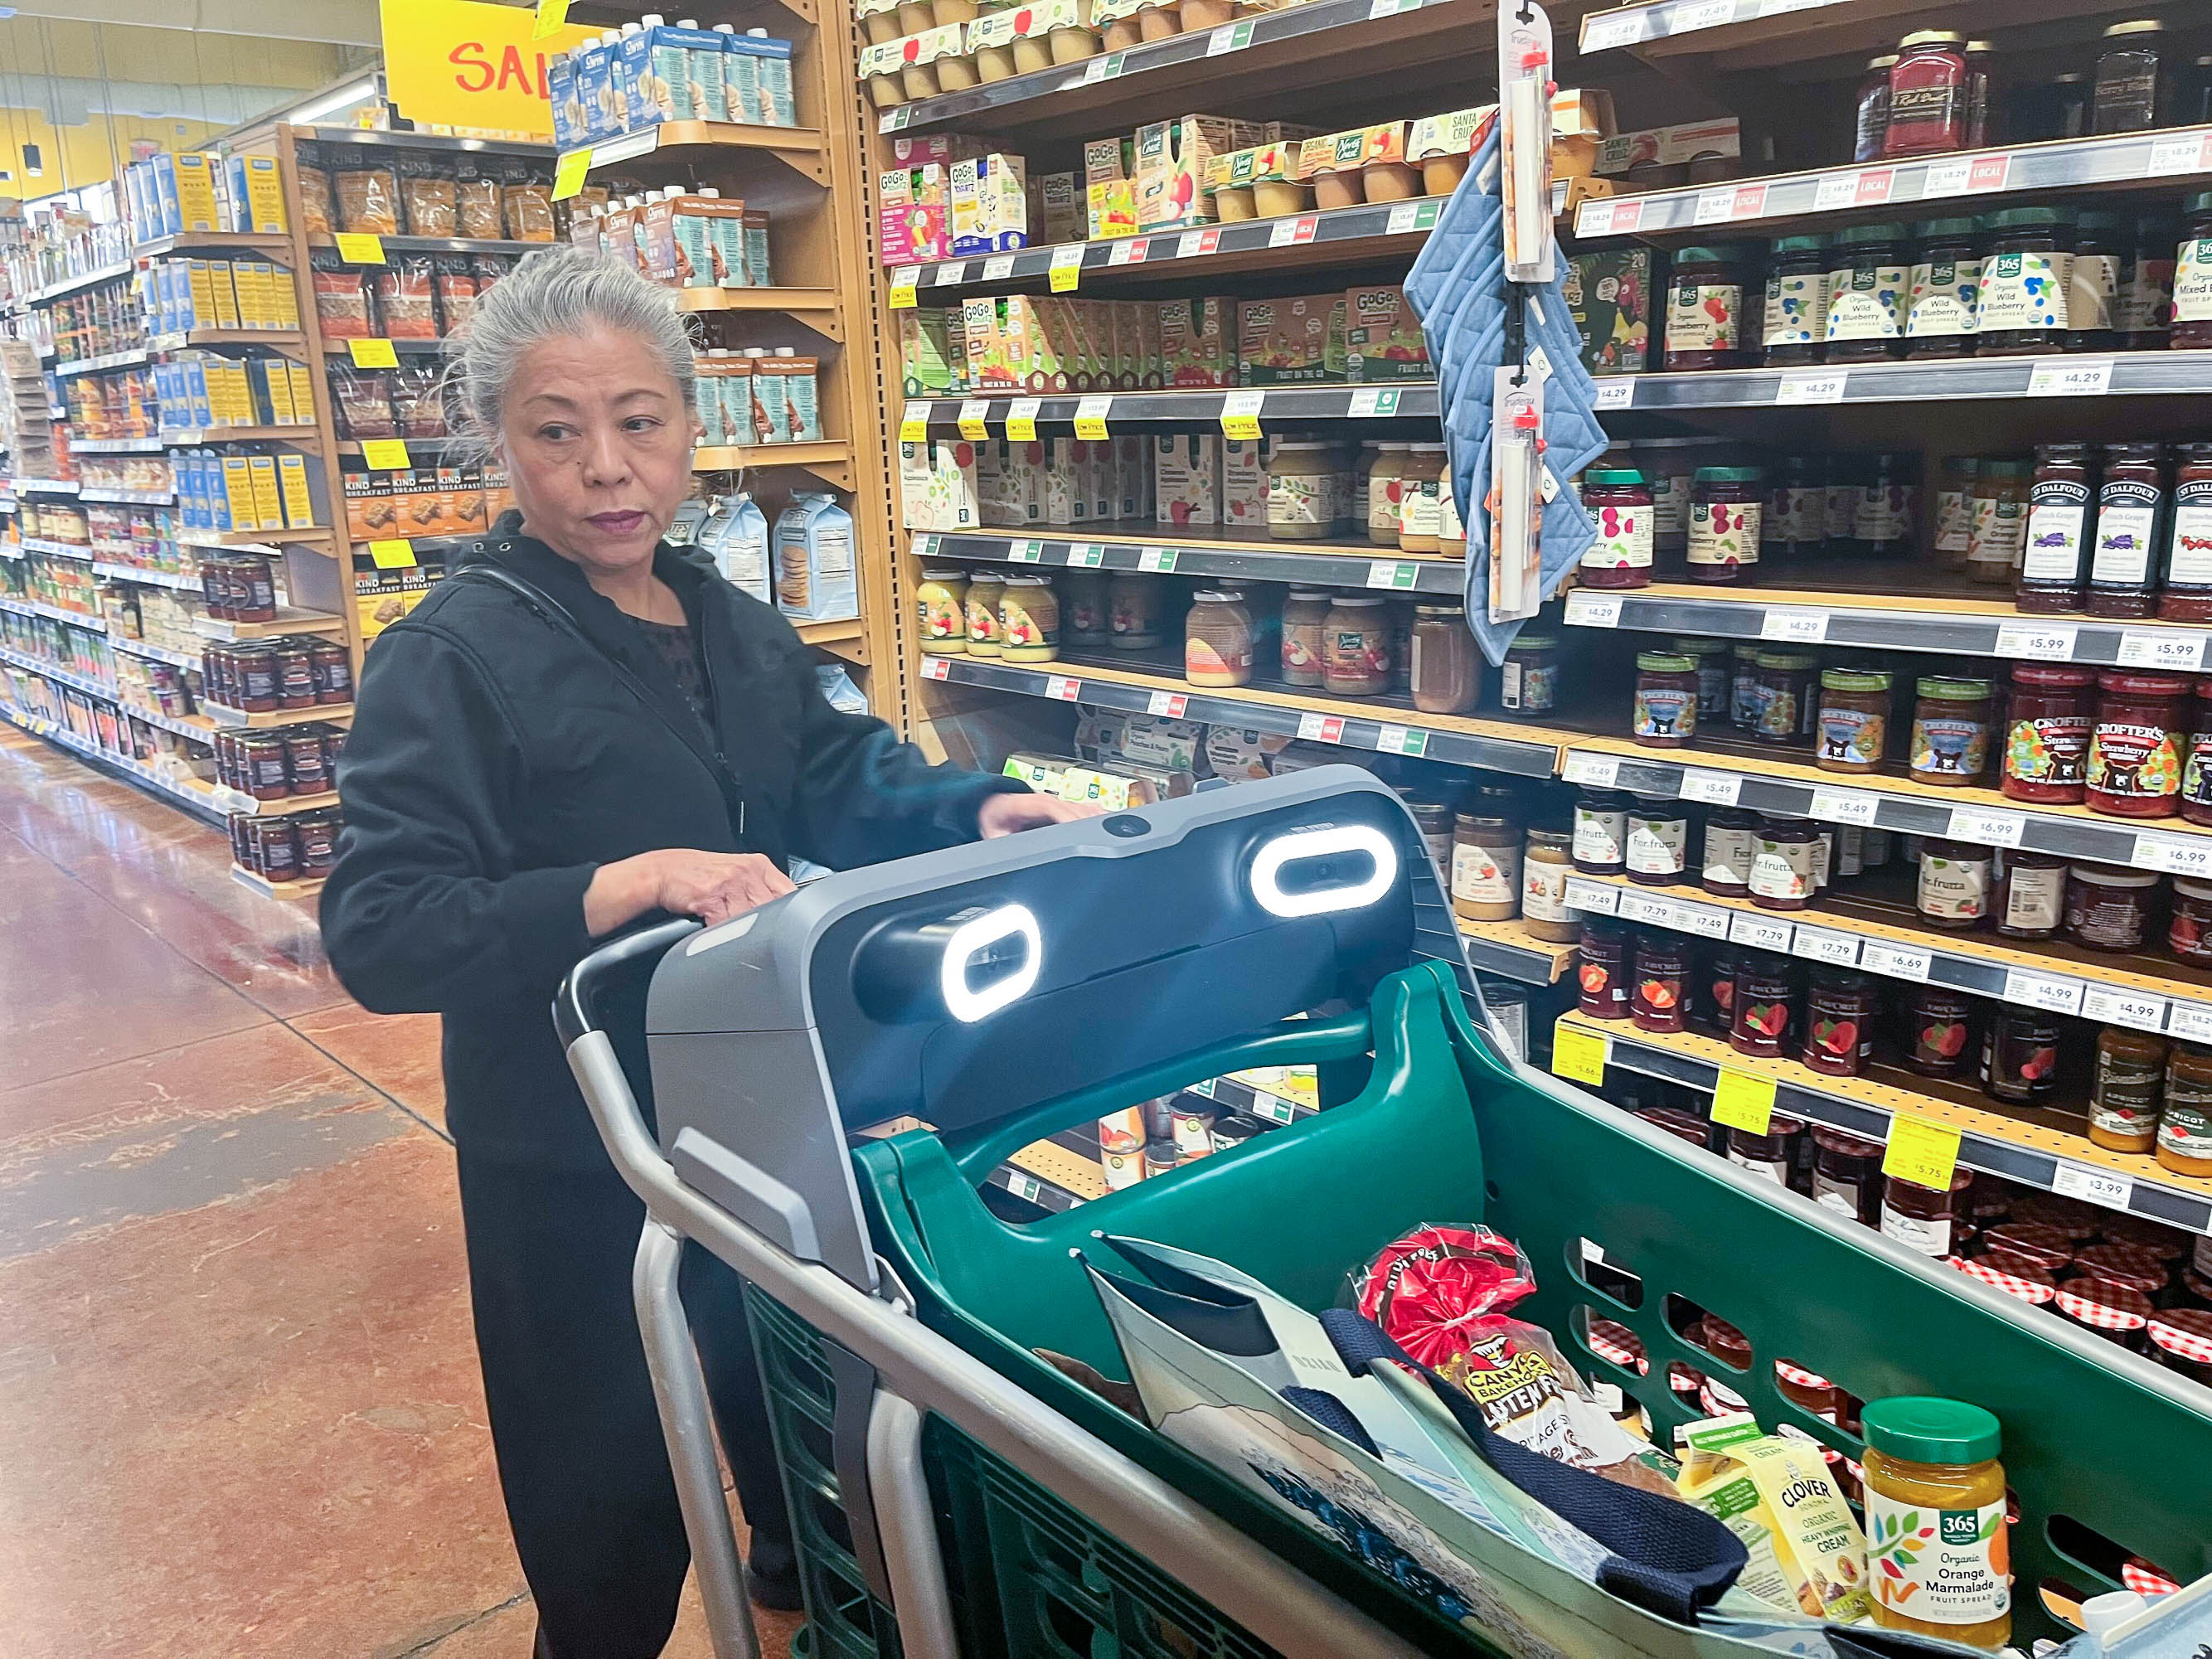 A woman with gray hair shops in a grocery aisle, pushing a cart with items in it.